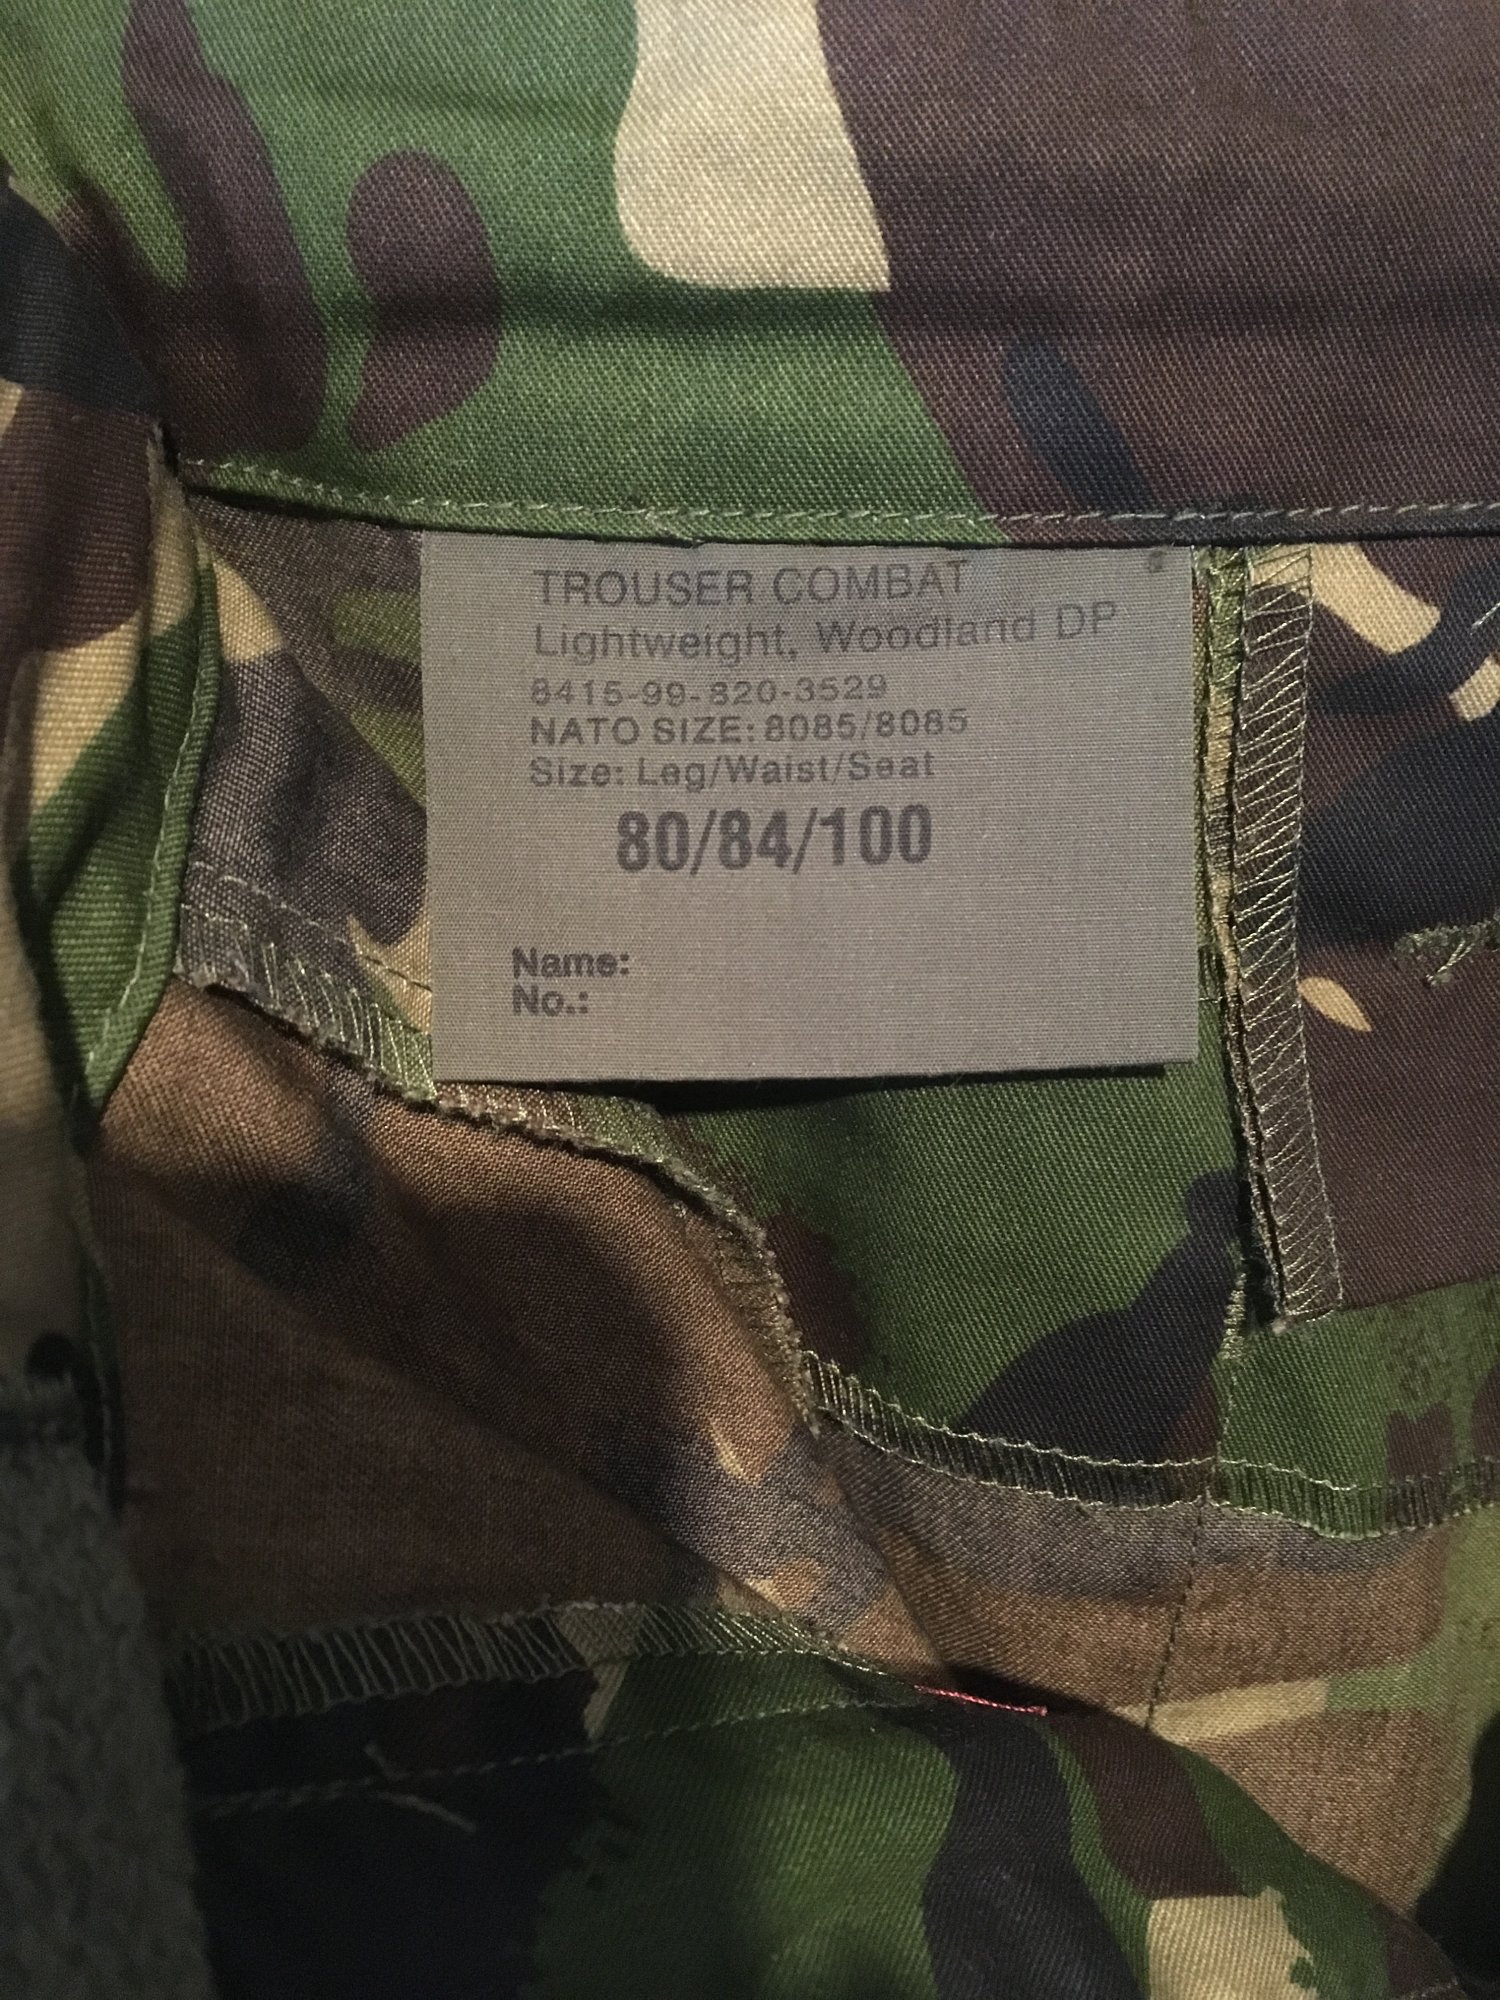 2 x DPM Soldier 95 Trousers - Gear - Airsoft Forums UK